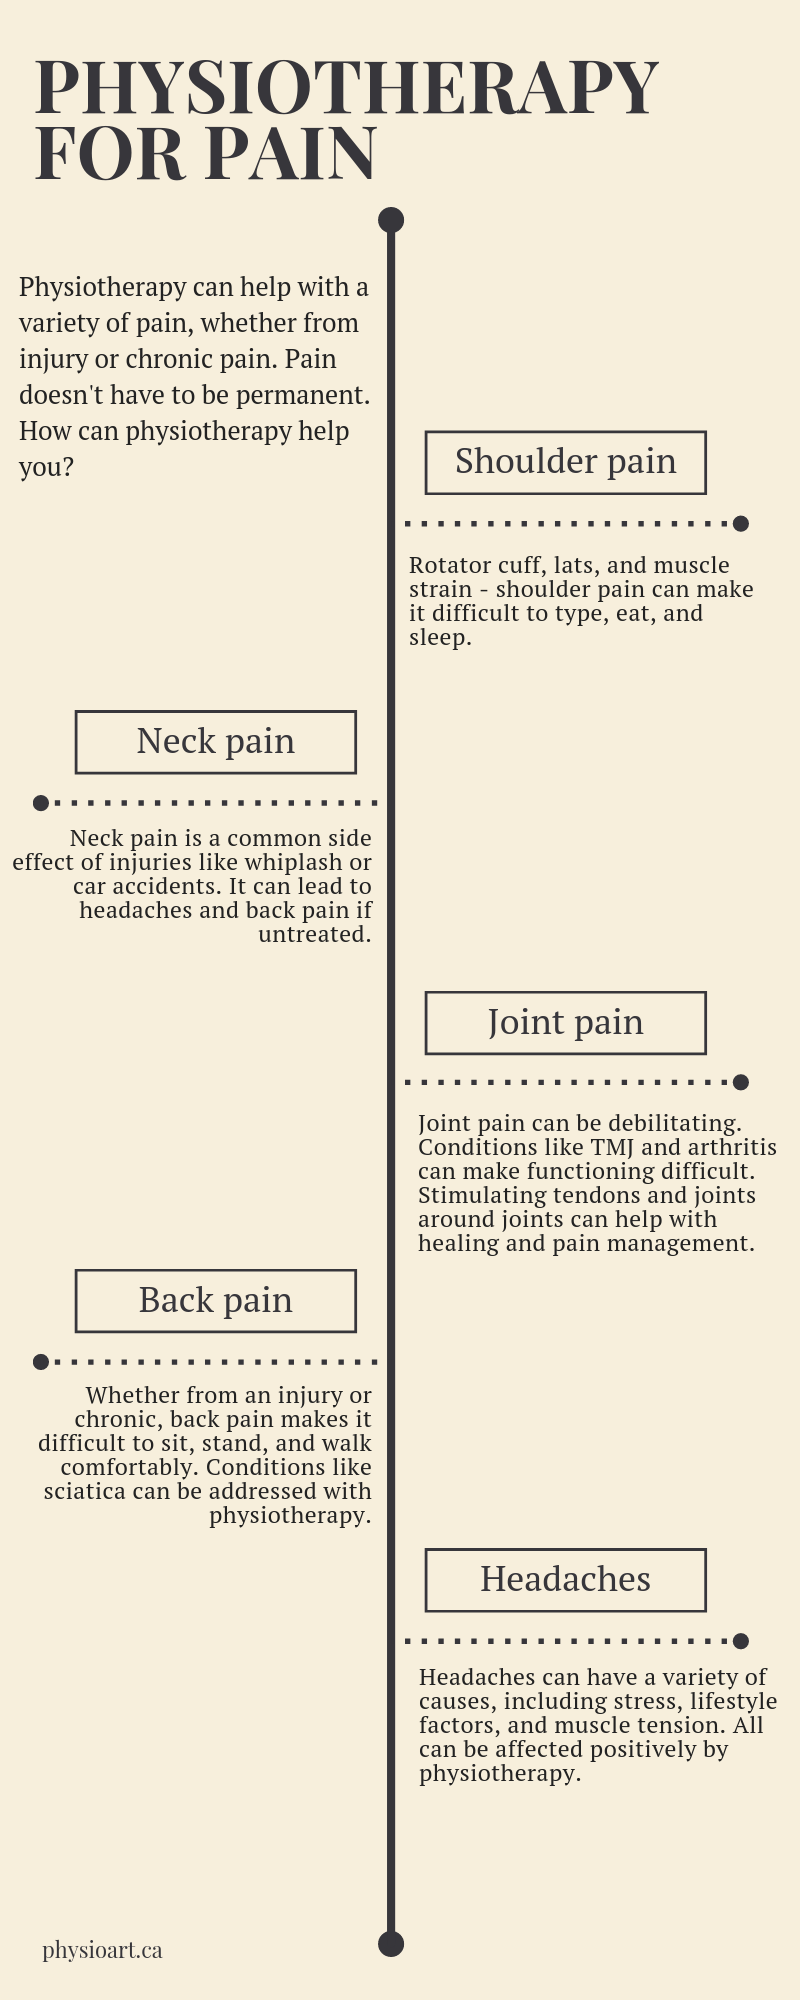 Physiotherapy for pain - Physio Art